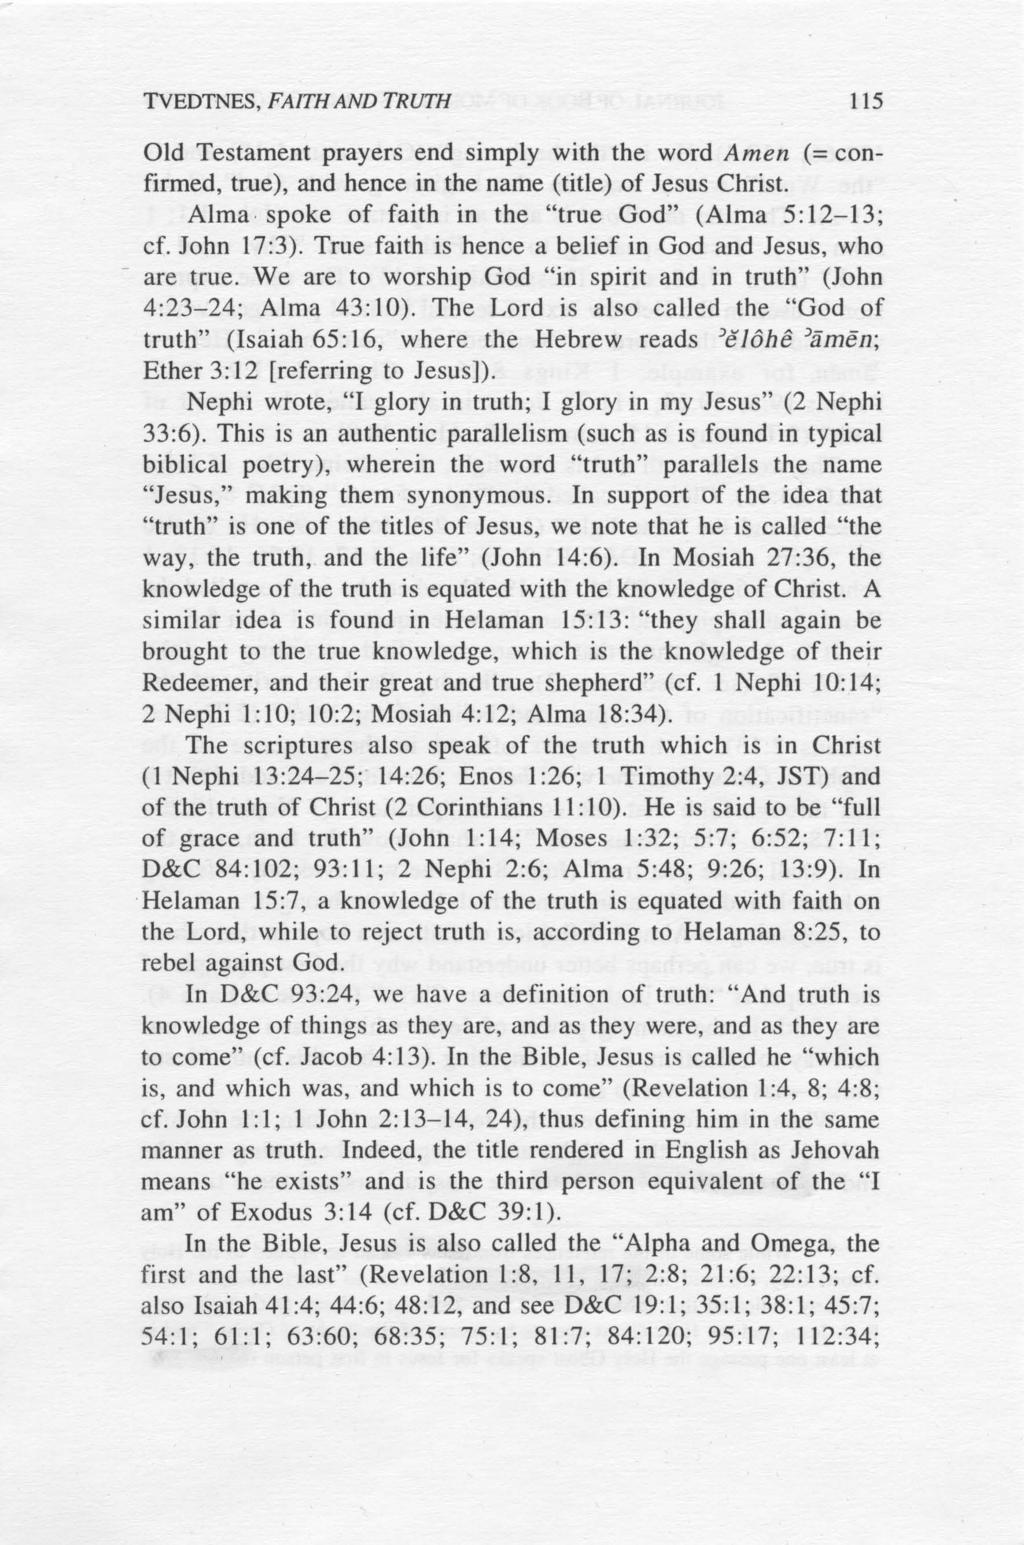 TVEDTNES, FAITH AND TRUTH 115 Old Testament prayers end simply with the word Amen (= confirmed, true), and hence in the name (title) of Jesus Christ.